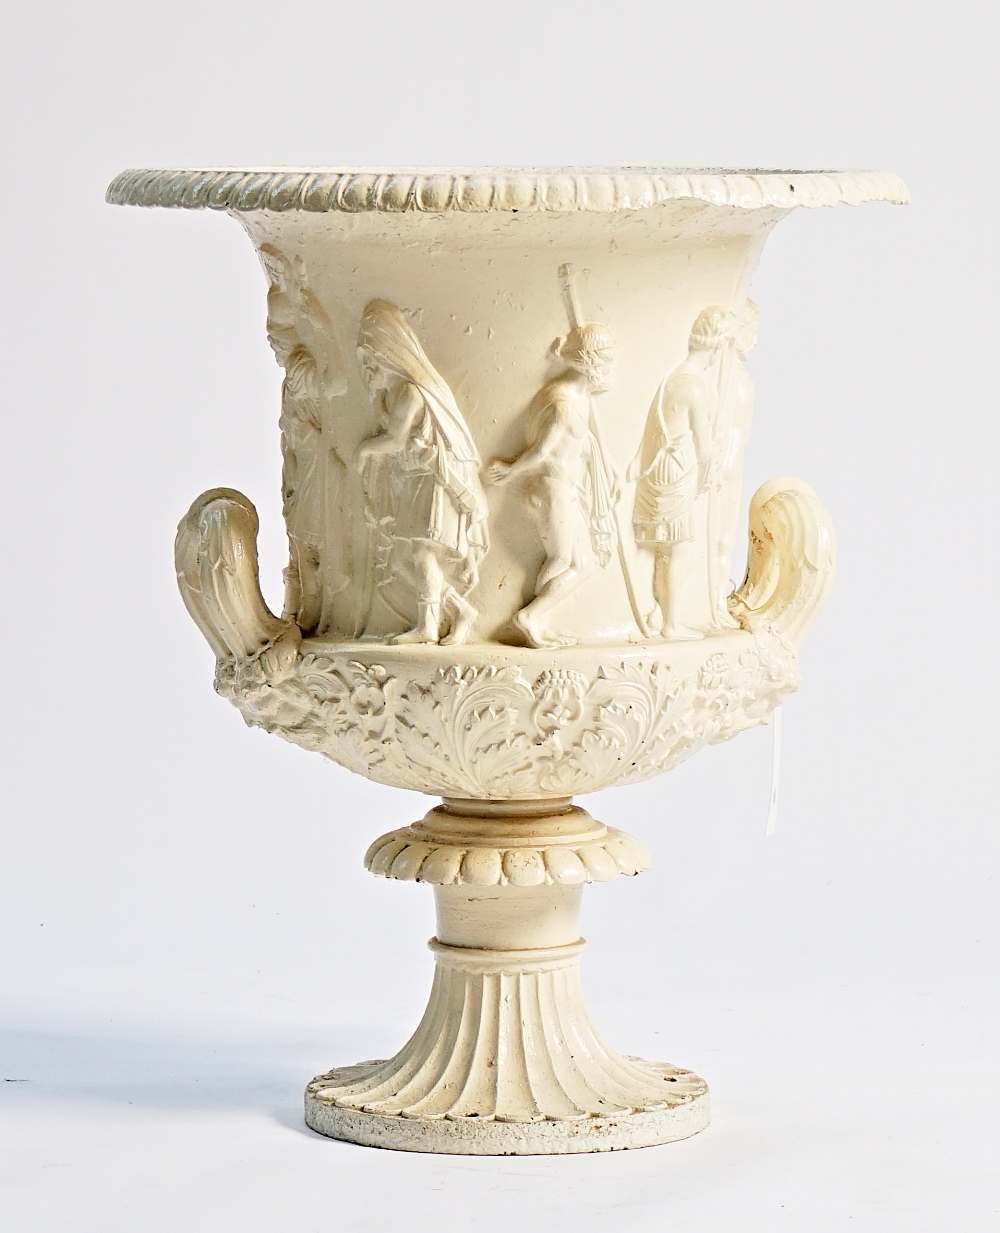 A white painted cast-iron urn